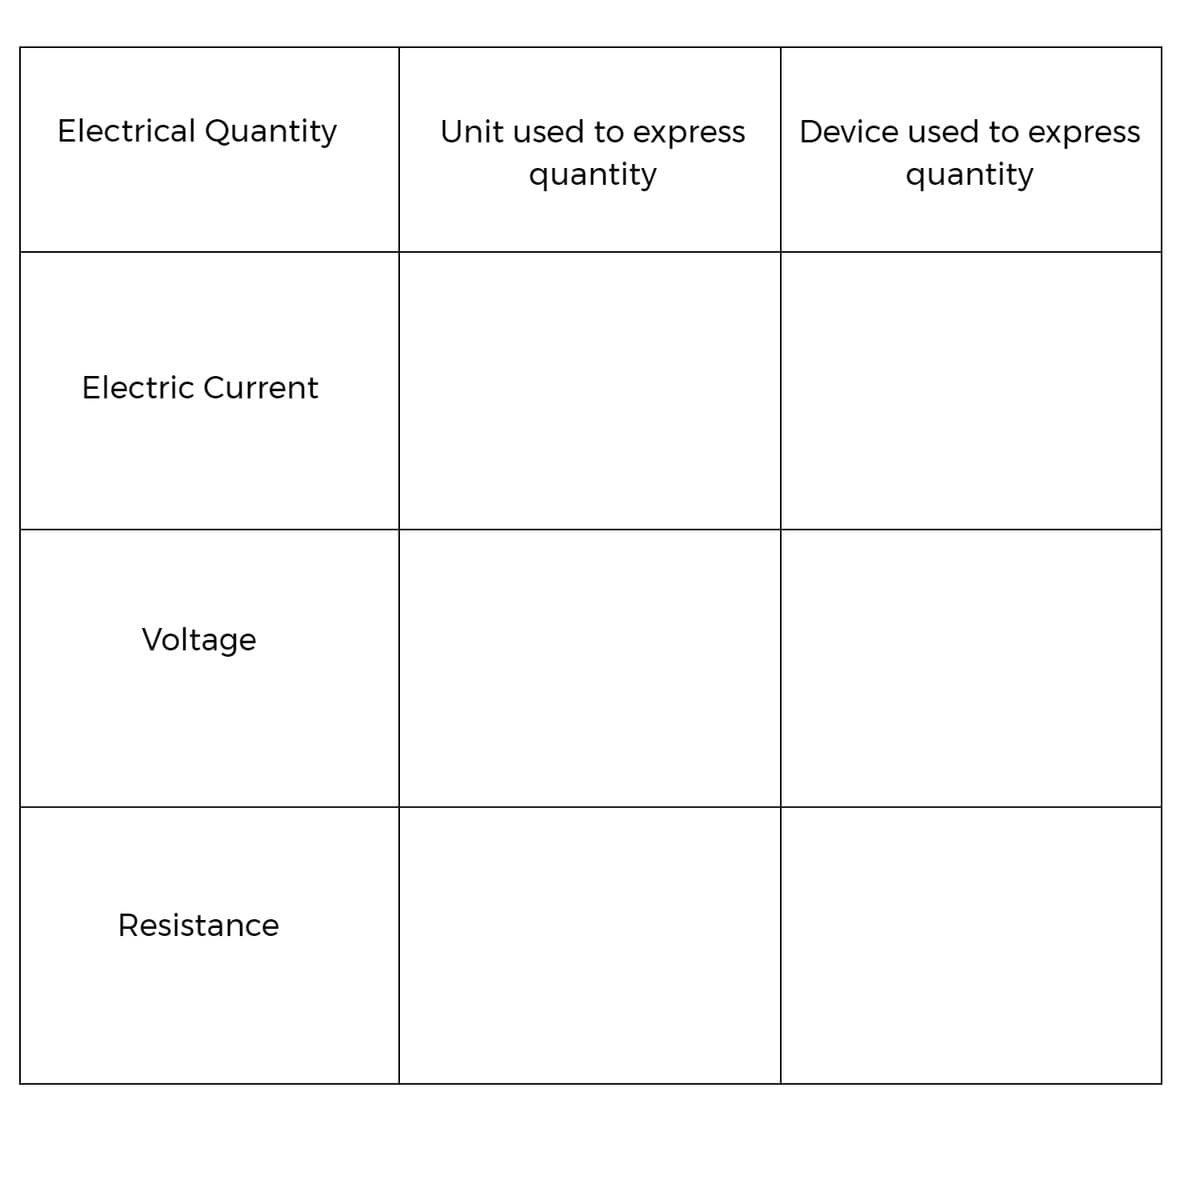 Electrical Quantity
Unit used to express
Device used to express
quantity
quantity
Electric Current
Voltage
Resistance
